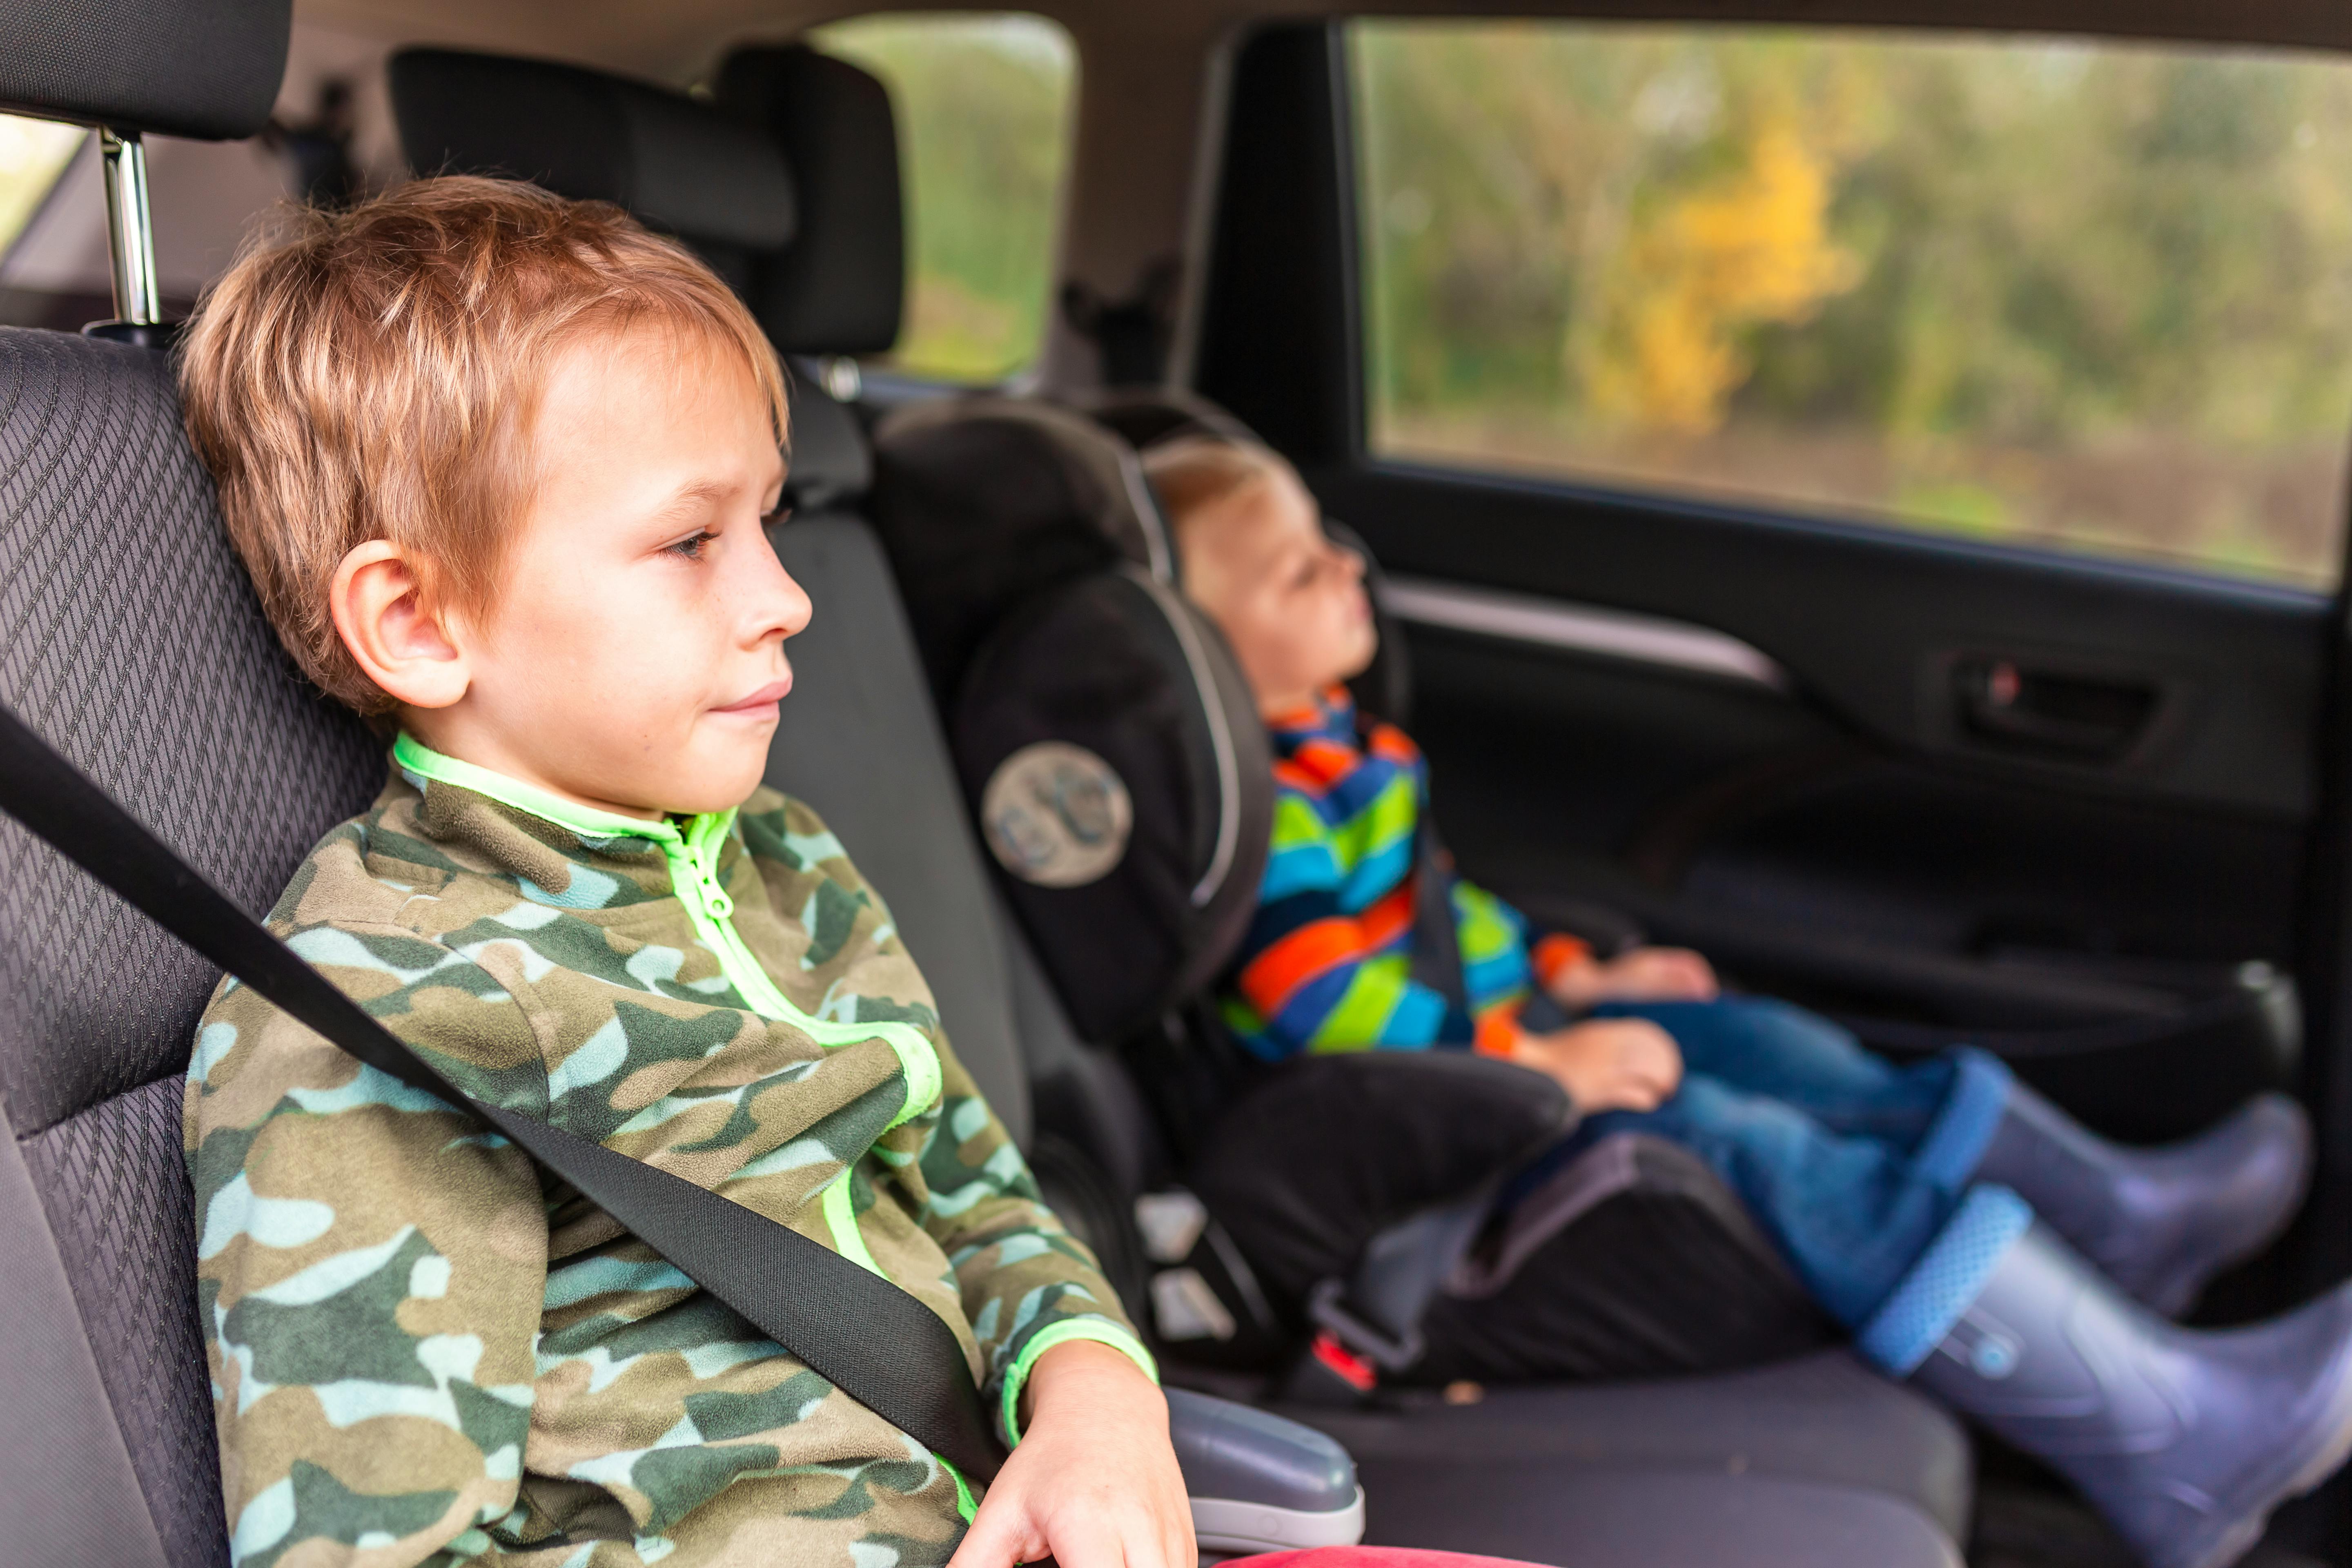 Lorraine Explains: Take care when shopping for car booster seats